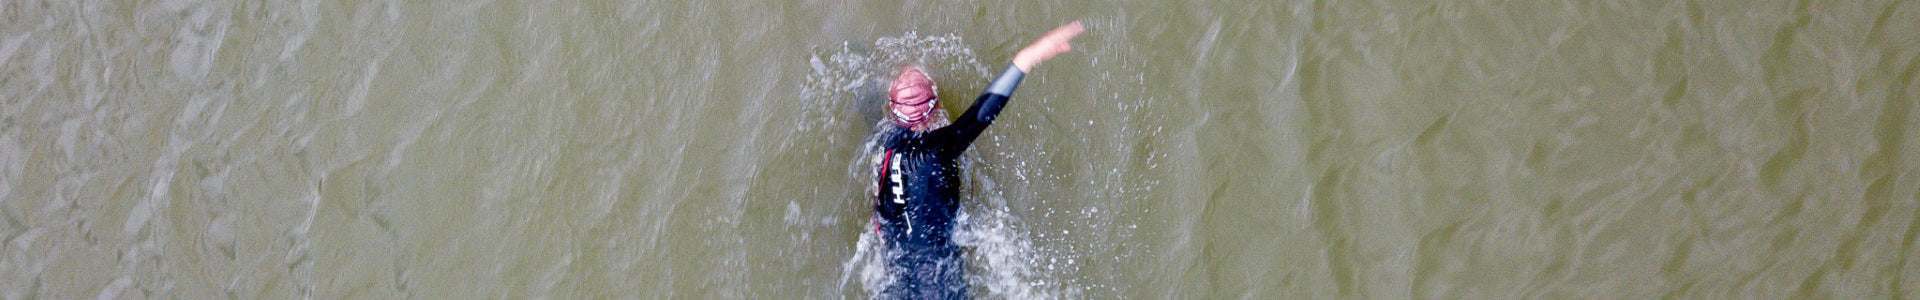 An interview with a triathlete